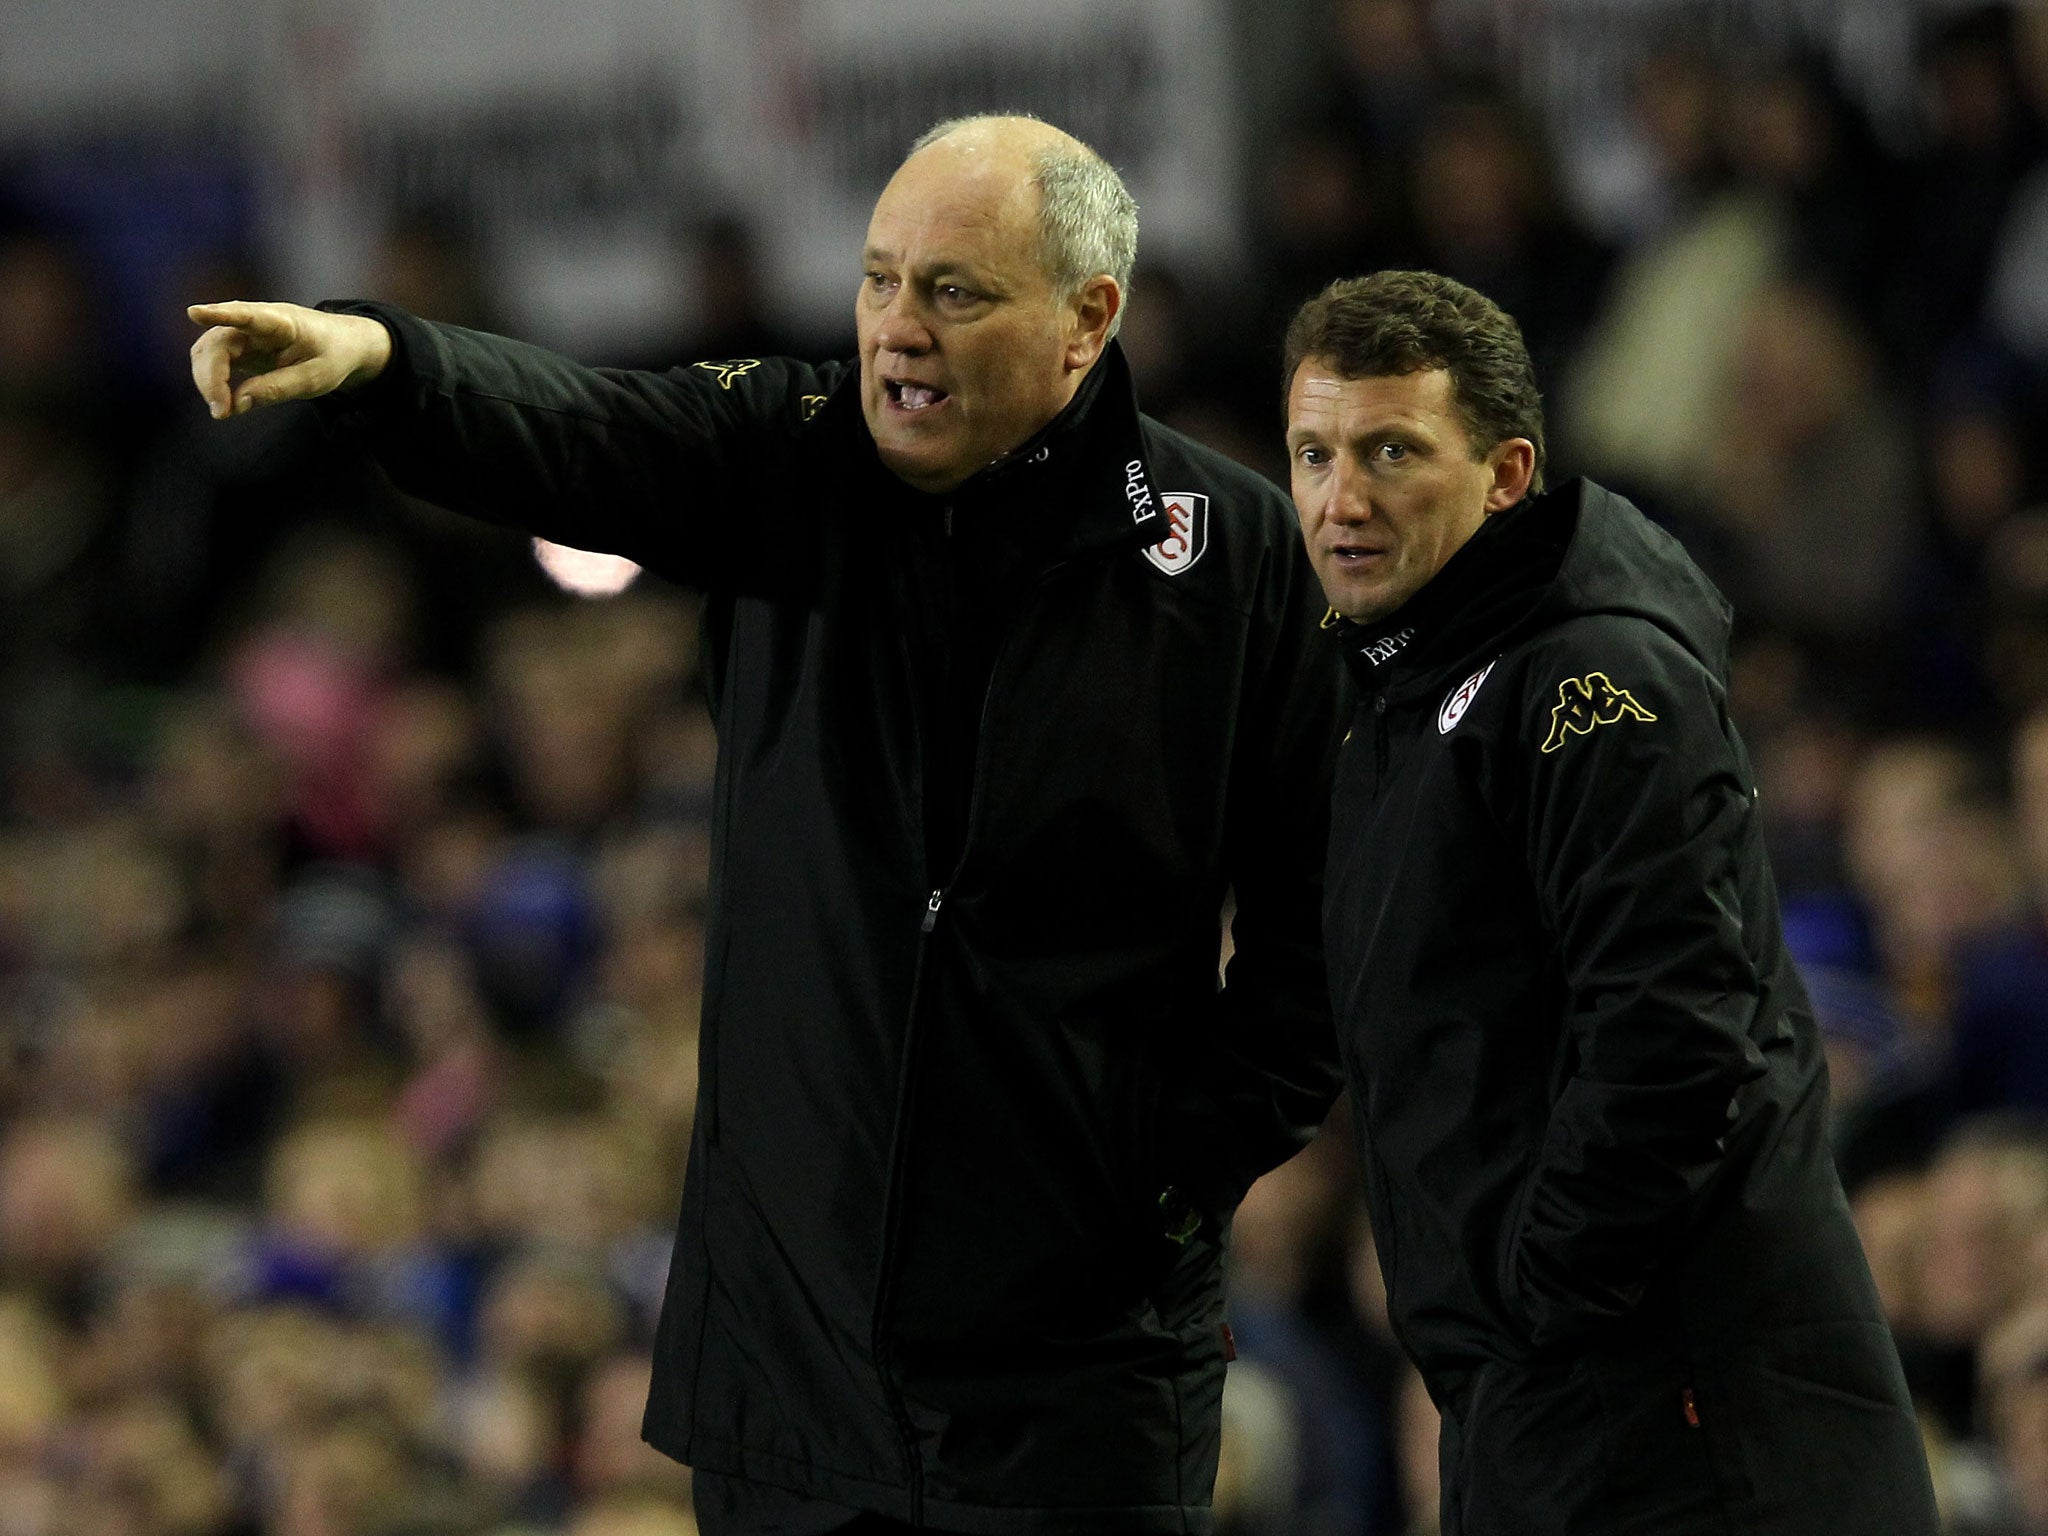 Billy McKinlay (right) was shown the door at Fulham after nearly 10 years when Martin Jol departed